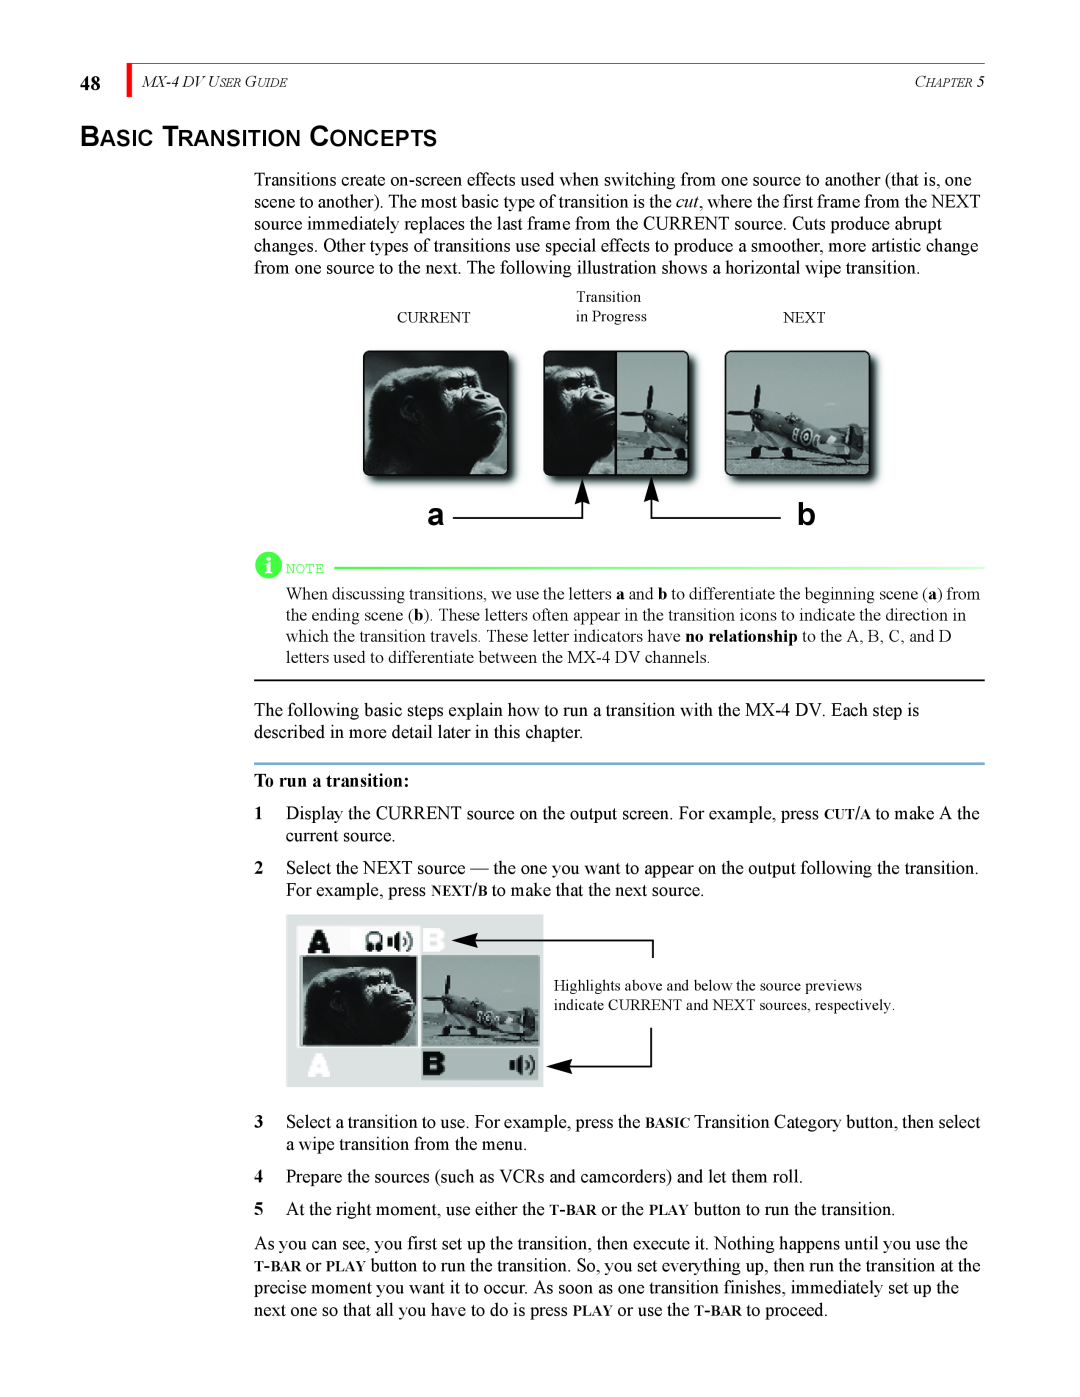 FOCUS Enhancements MX-4DV manual Basic Transition Concepts, To run a transition 